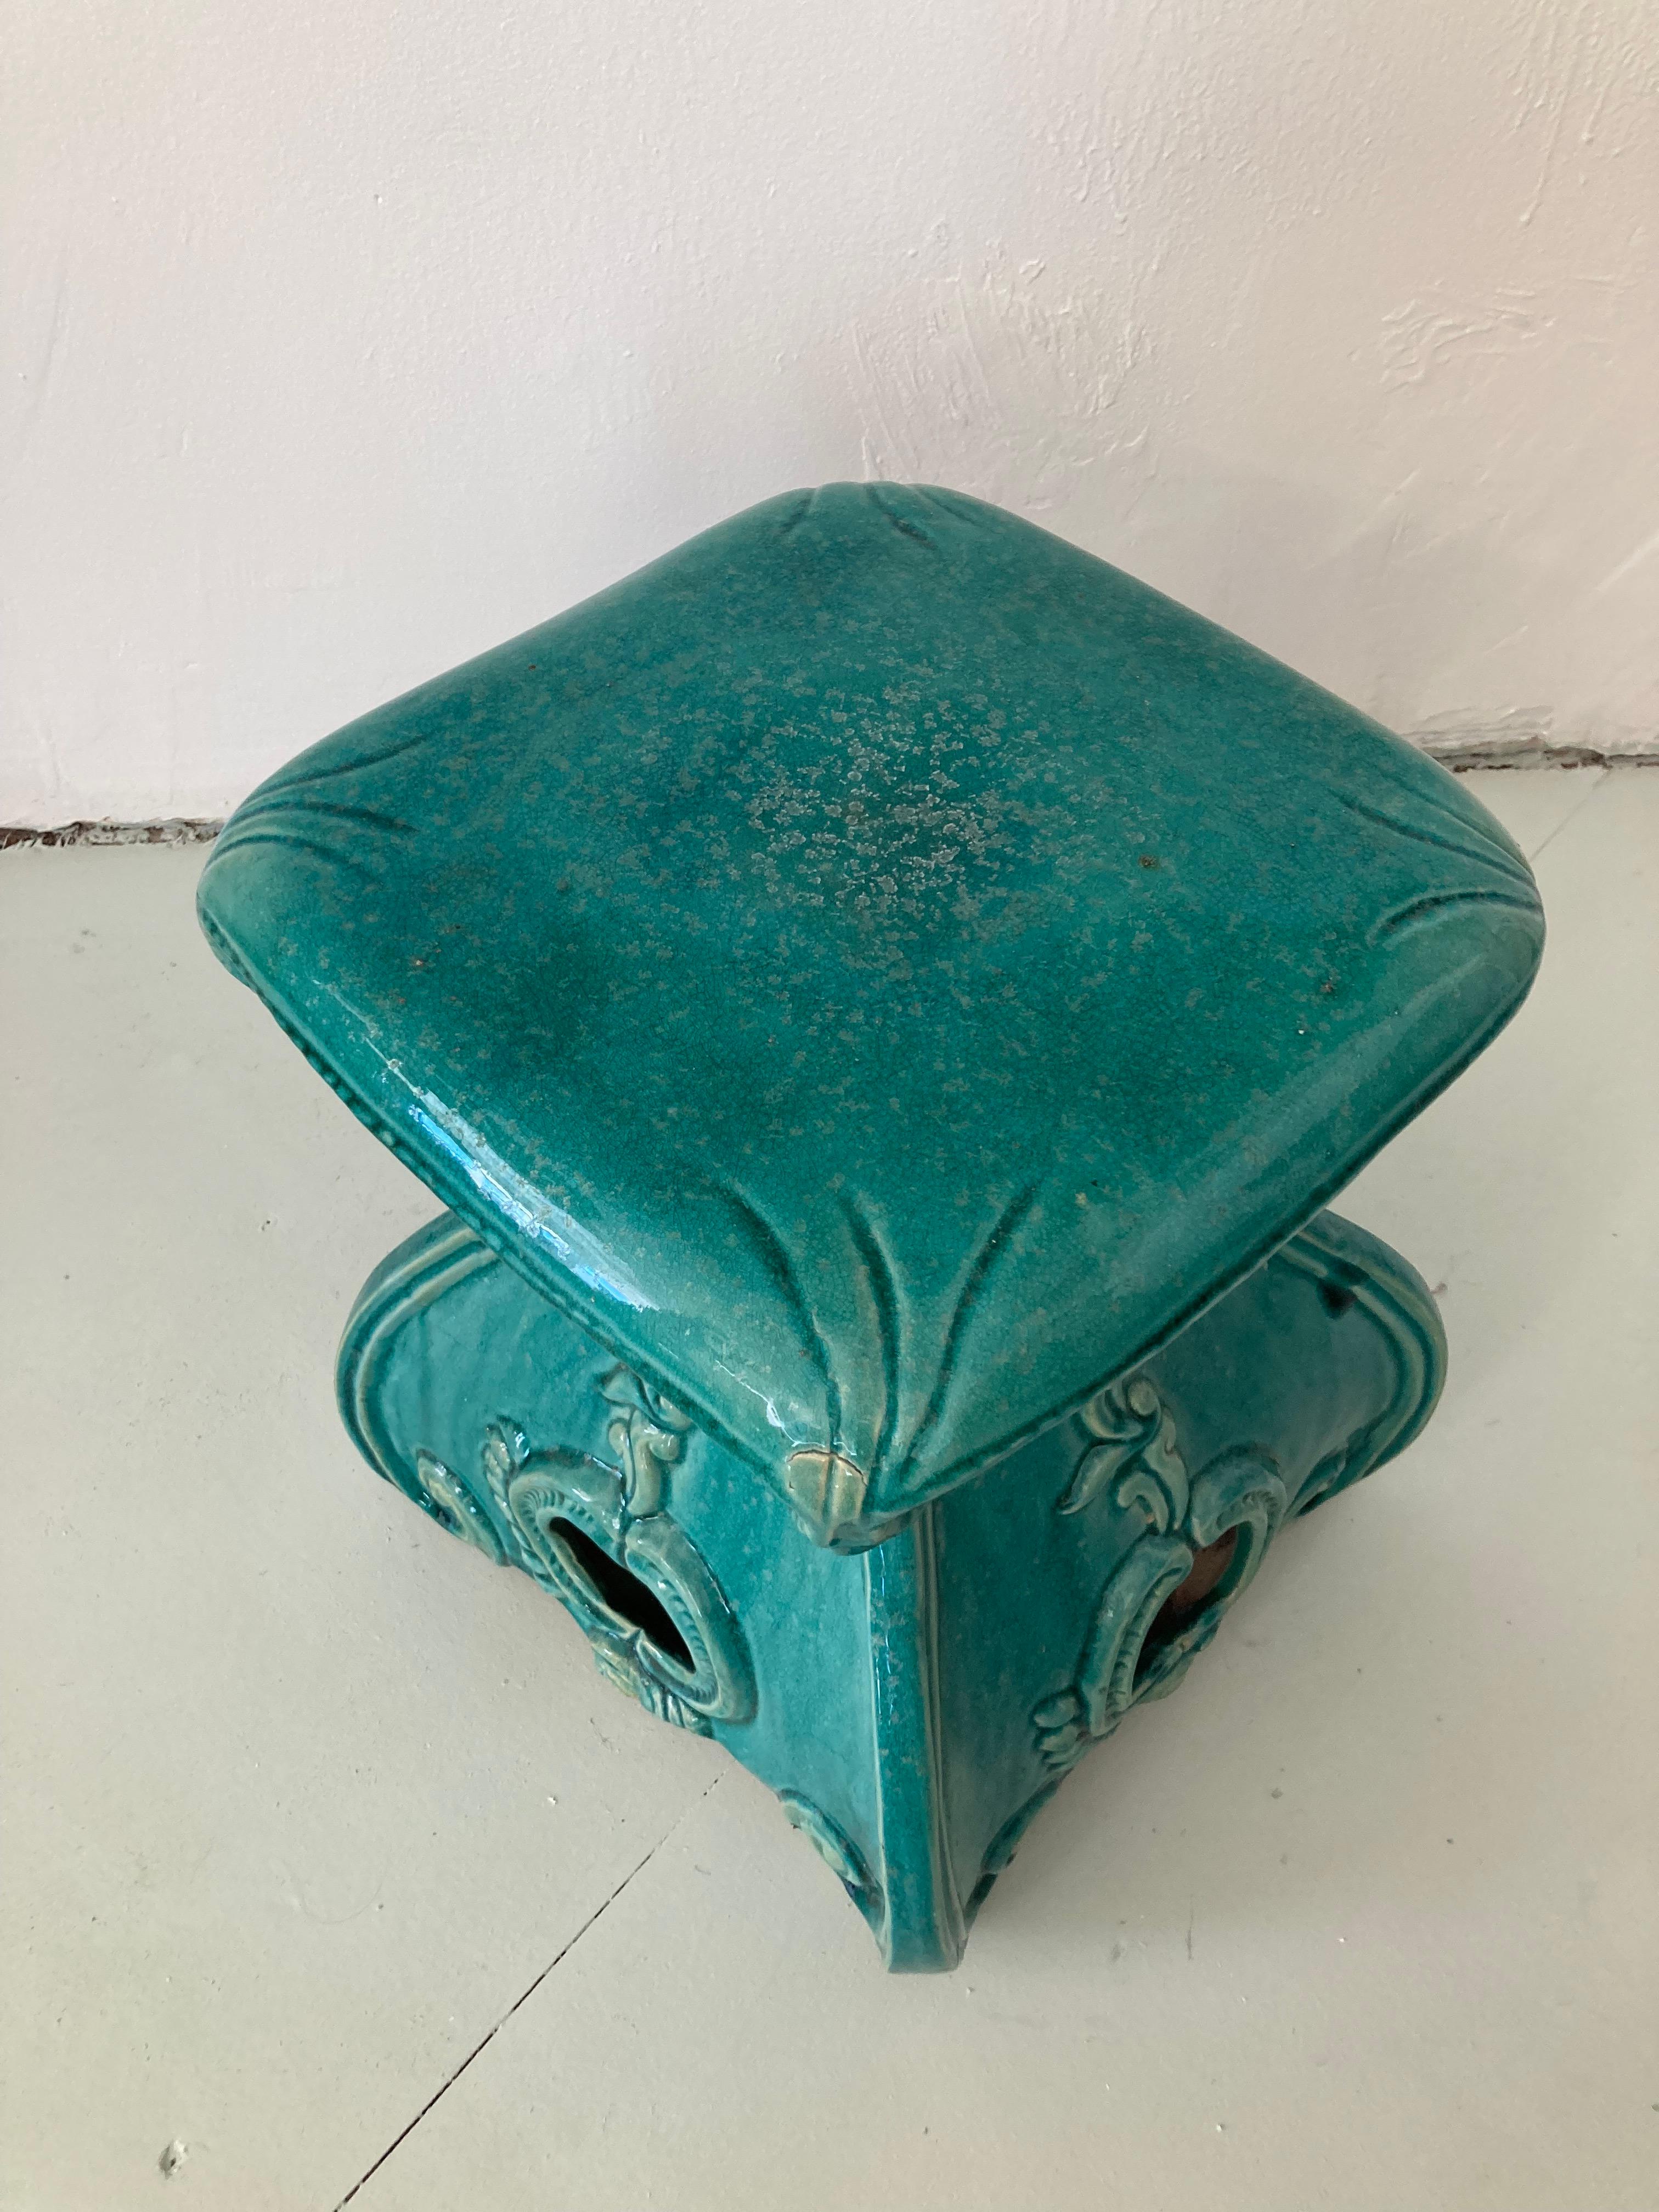 Turquoise Glazed Terra Cotta Garden Seat In Good Condition For Sale In Los Angeles, CA